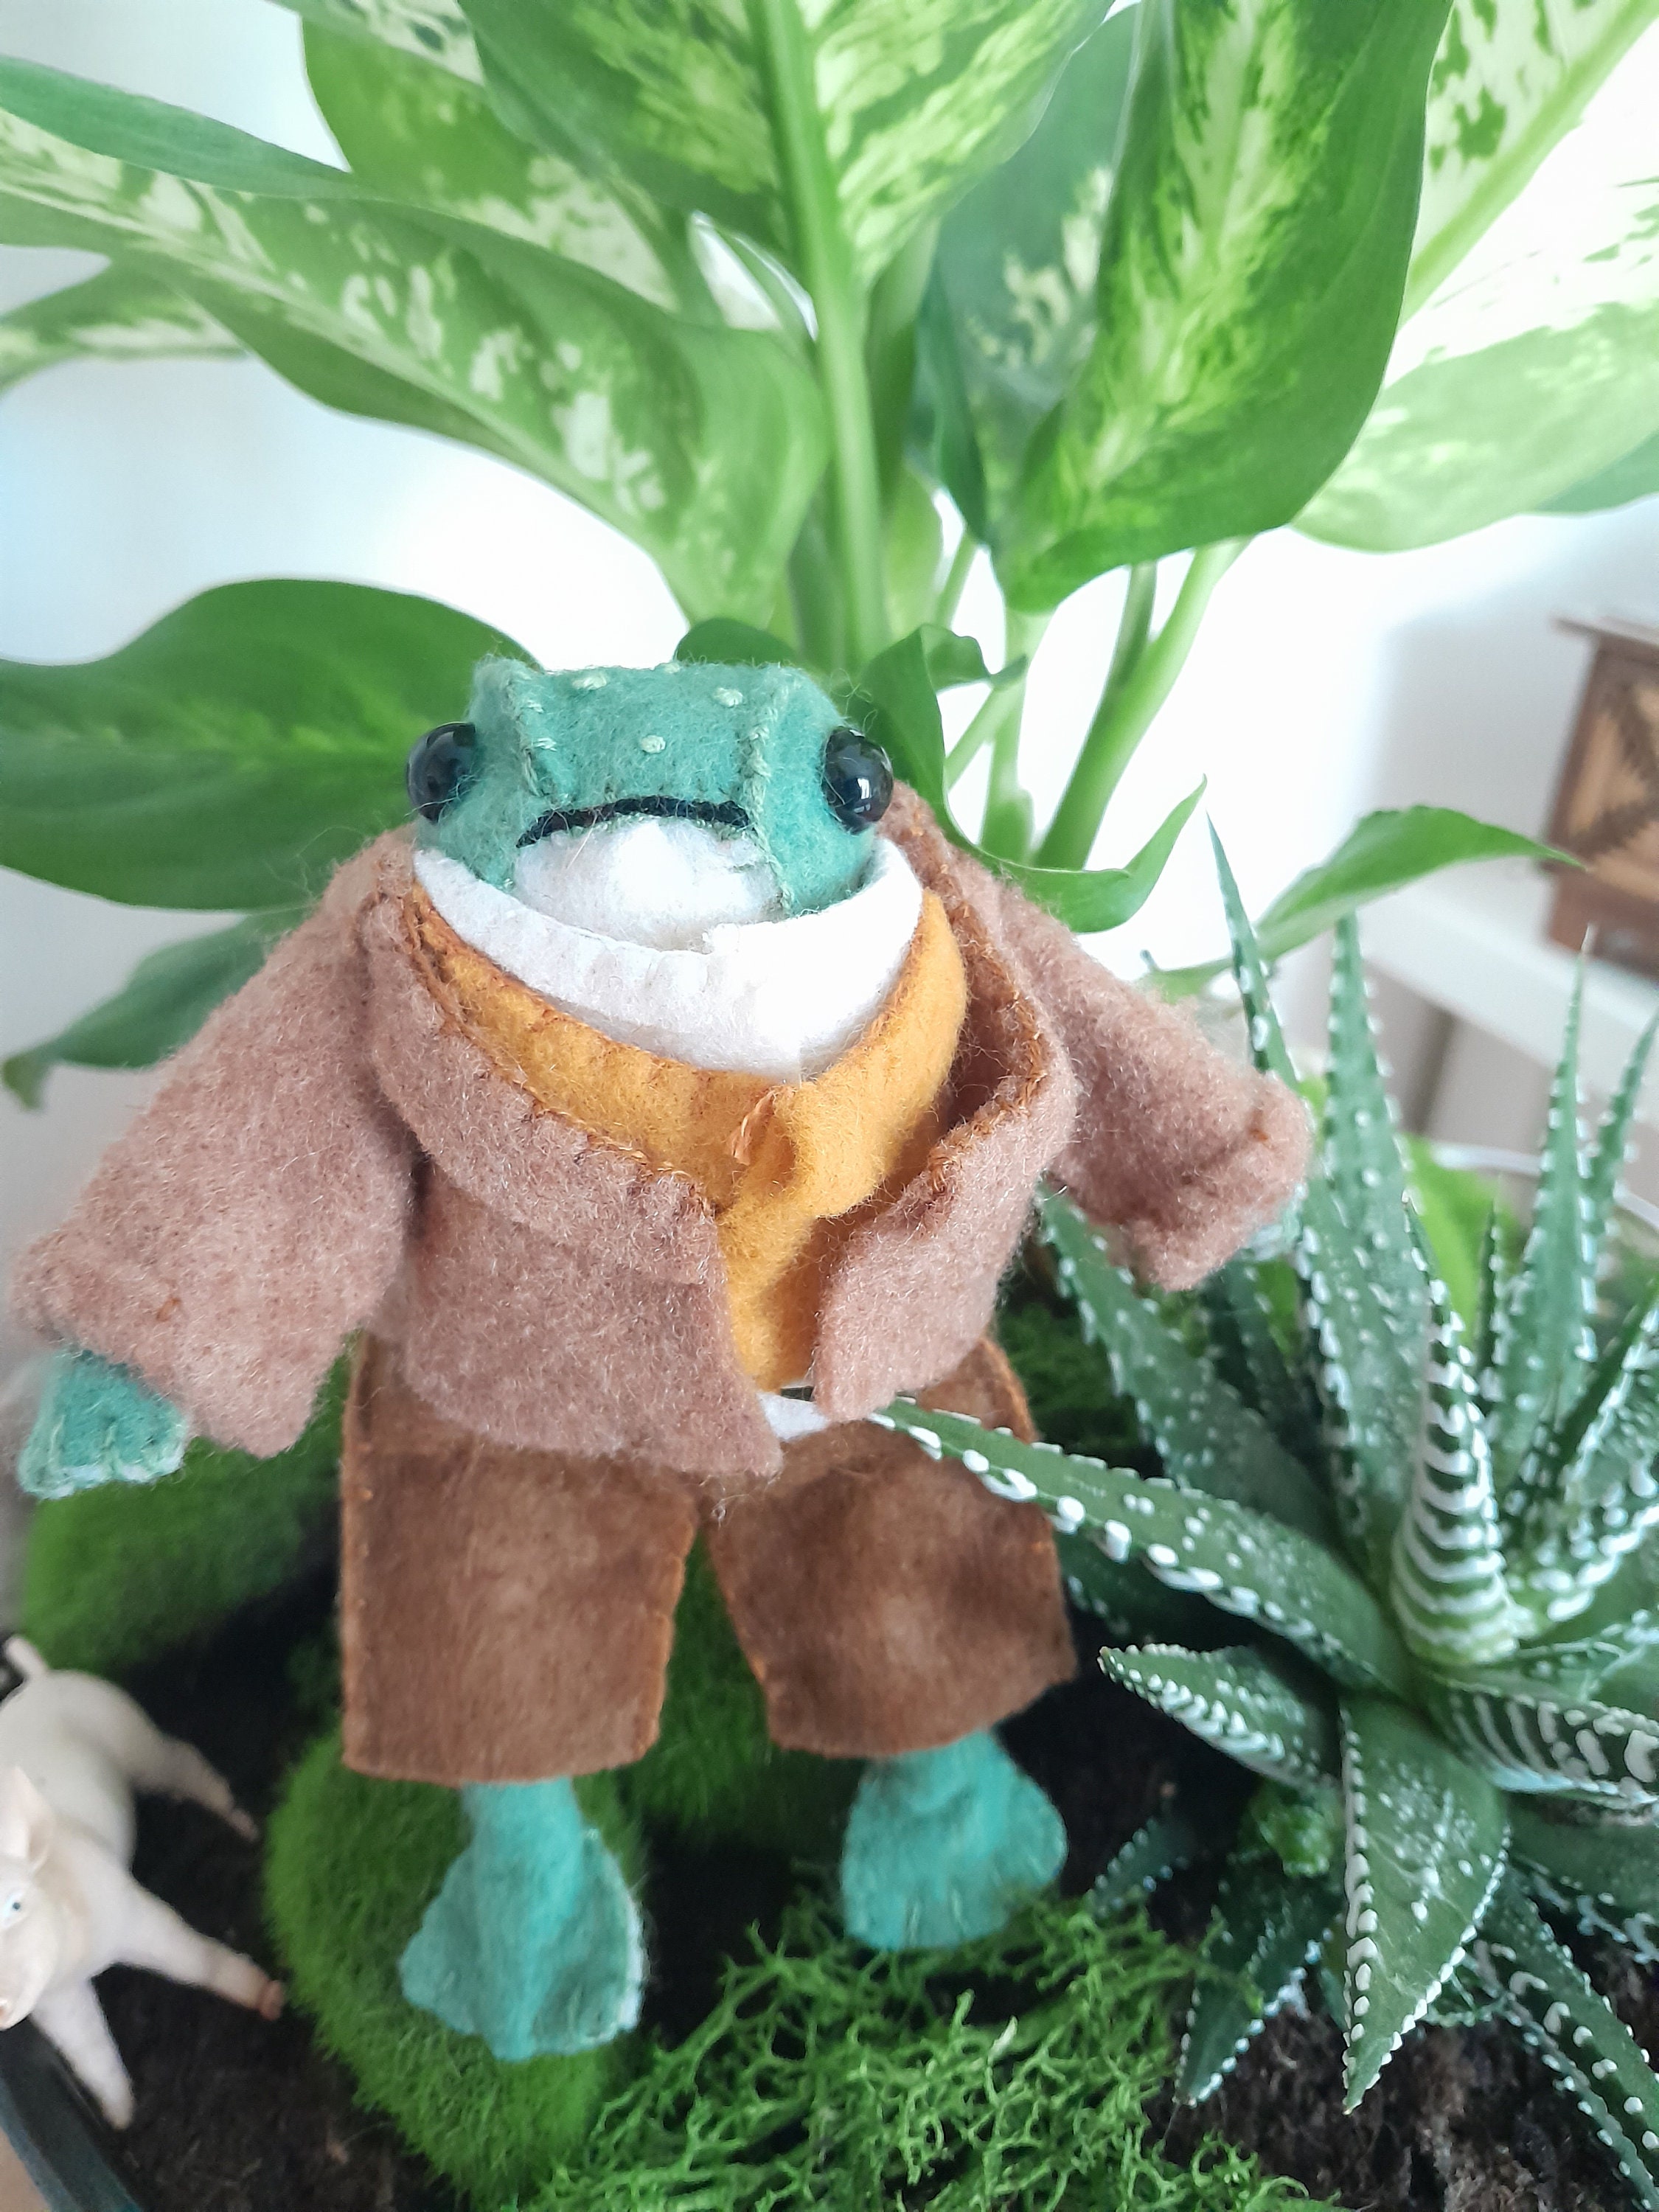 Doudou, Plush, Toy, Frog, Frog, Toad, in Felt, Felt, and Clothes